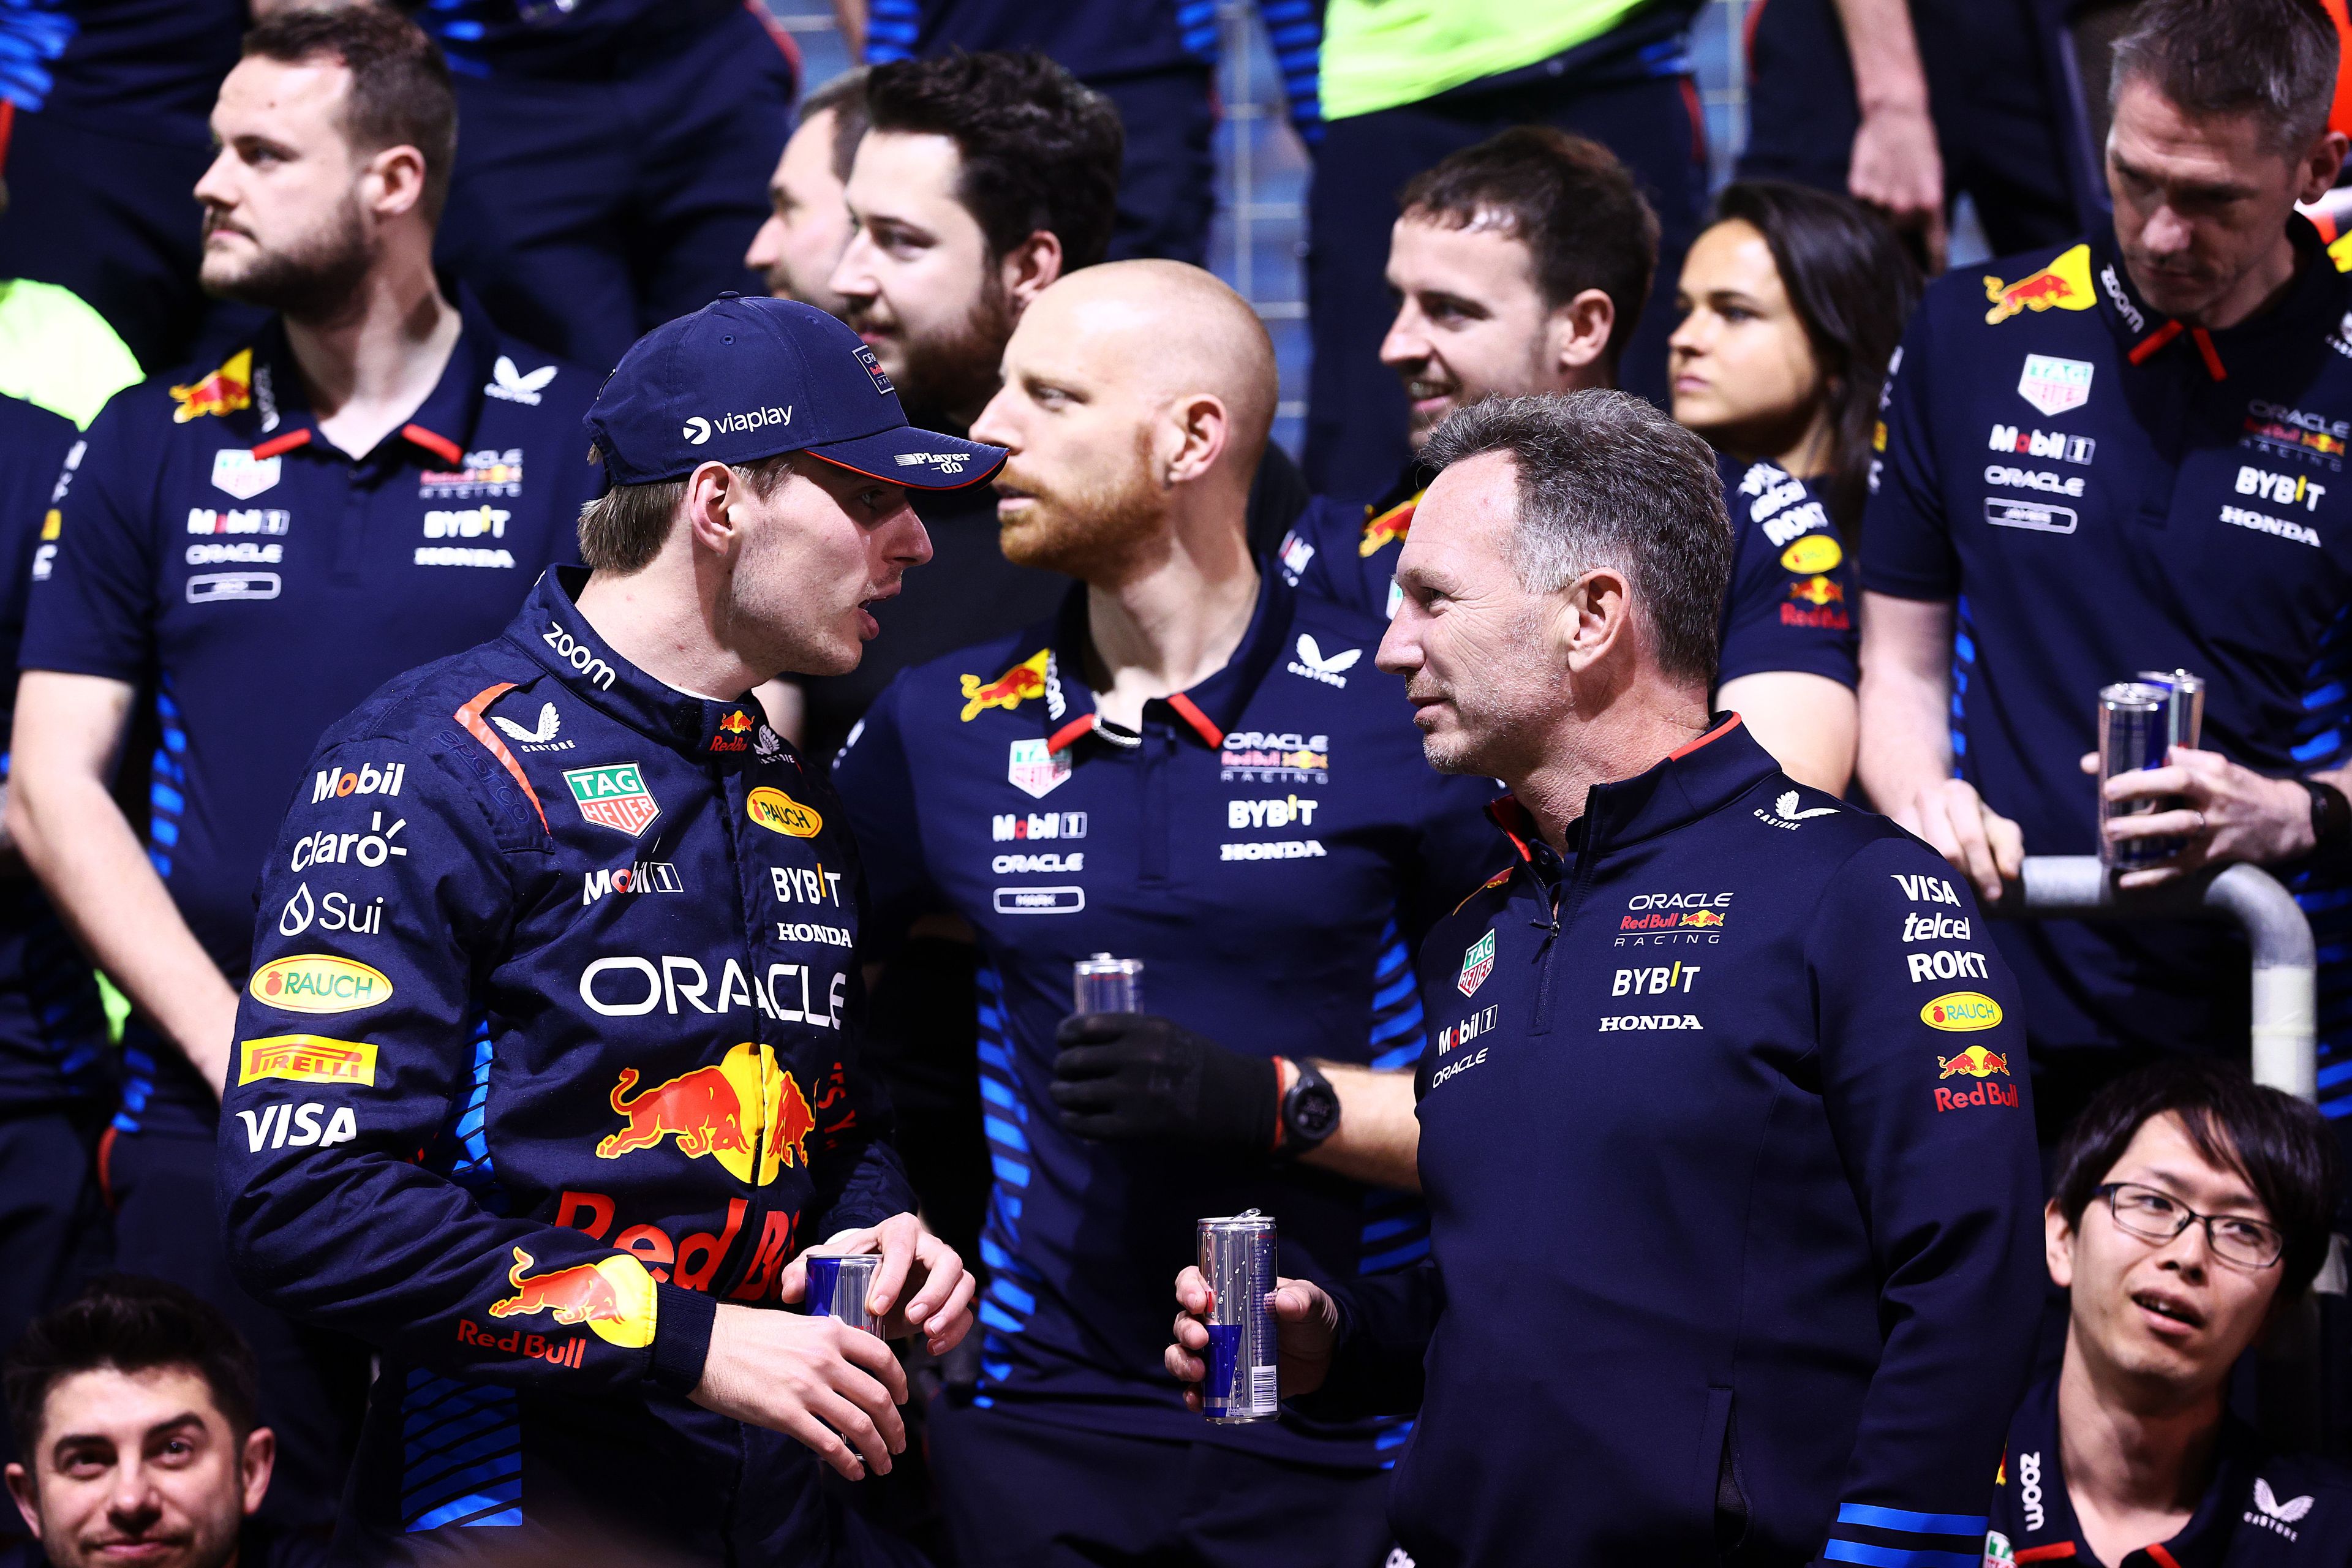 'Designed to create noise': Christian Horner rips Toto Wolff's commentary around 'unavailable' Max Verstappen